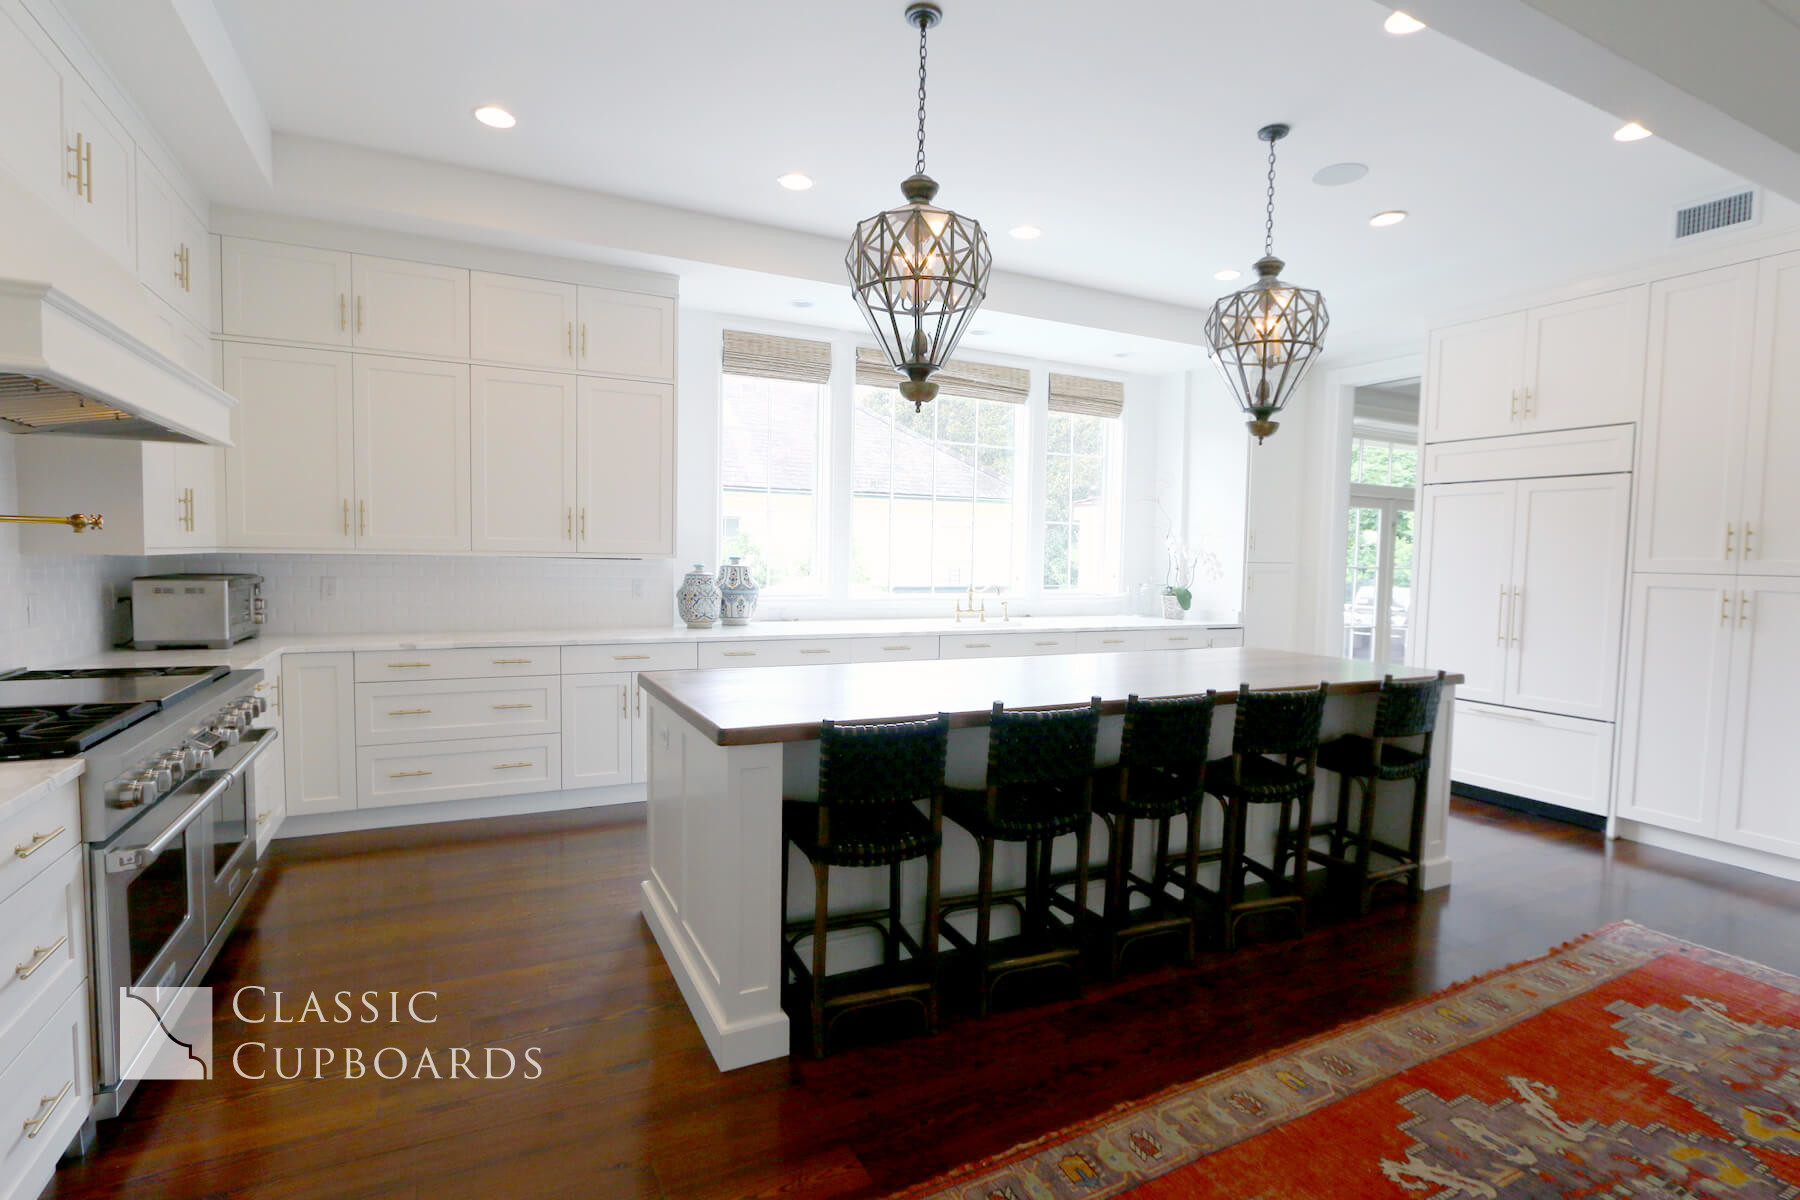 Transitional Kitchen style with custom cabinetry